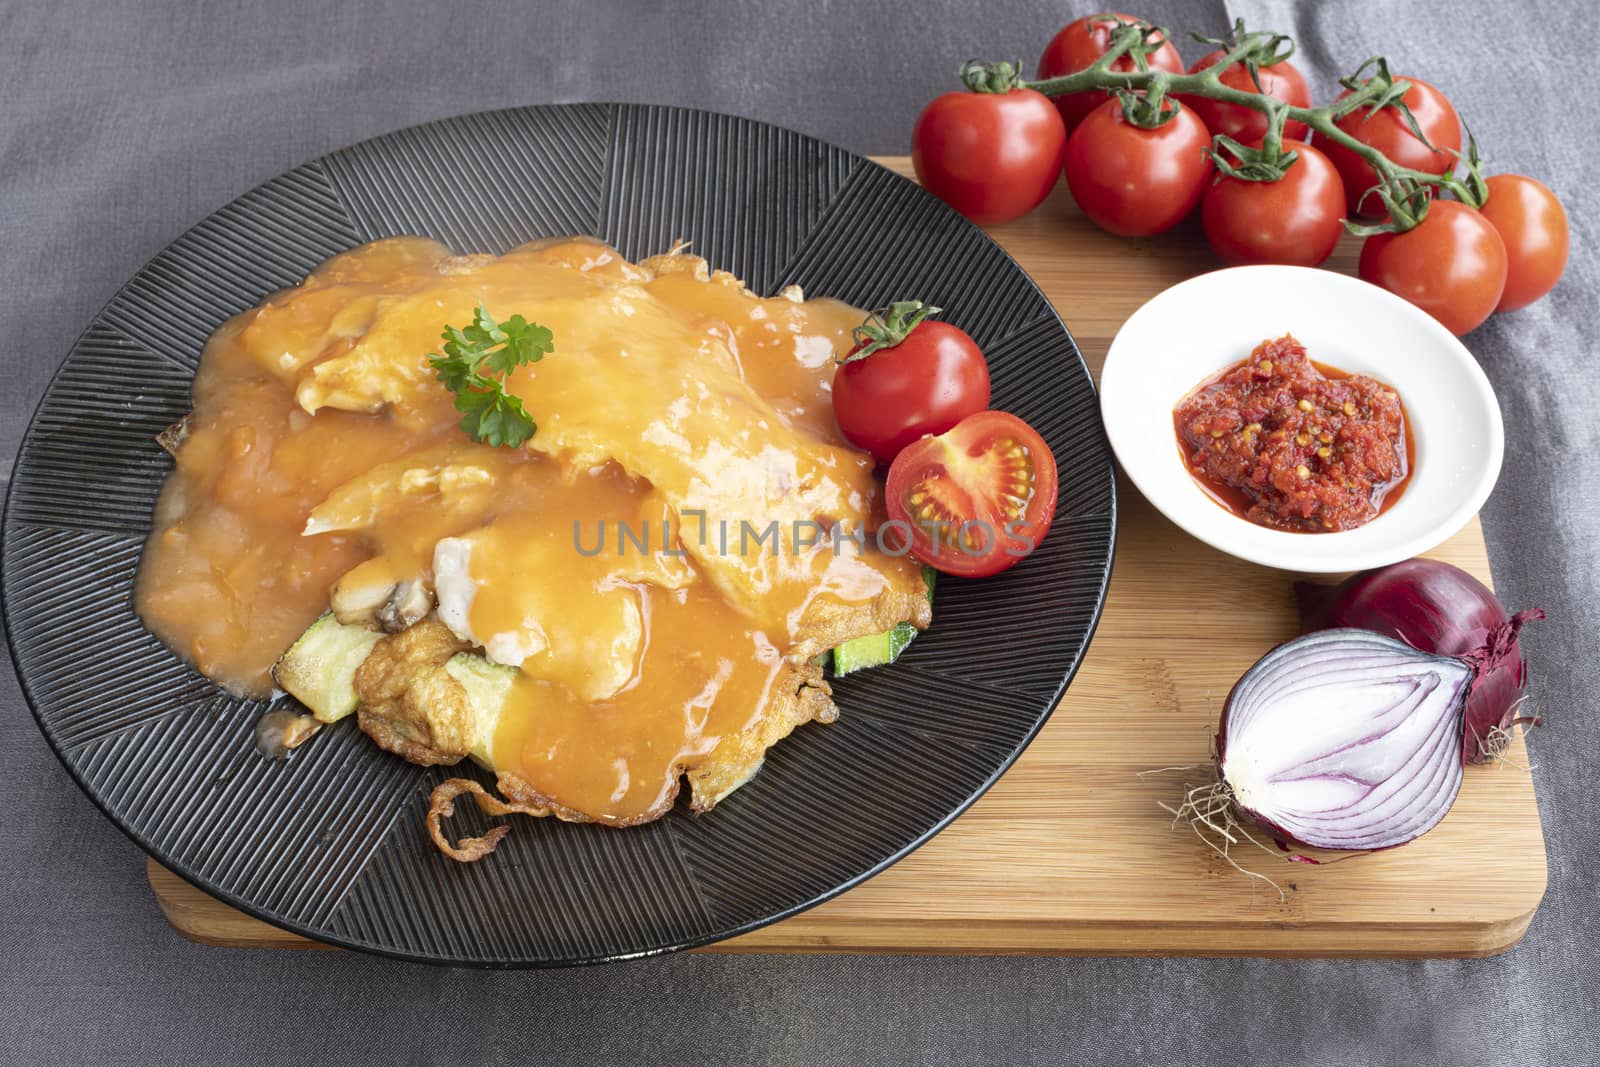 Omelet served with several type of vegetables and tomatoe sauce by ankorlight